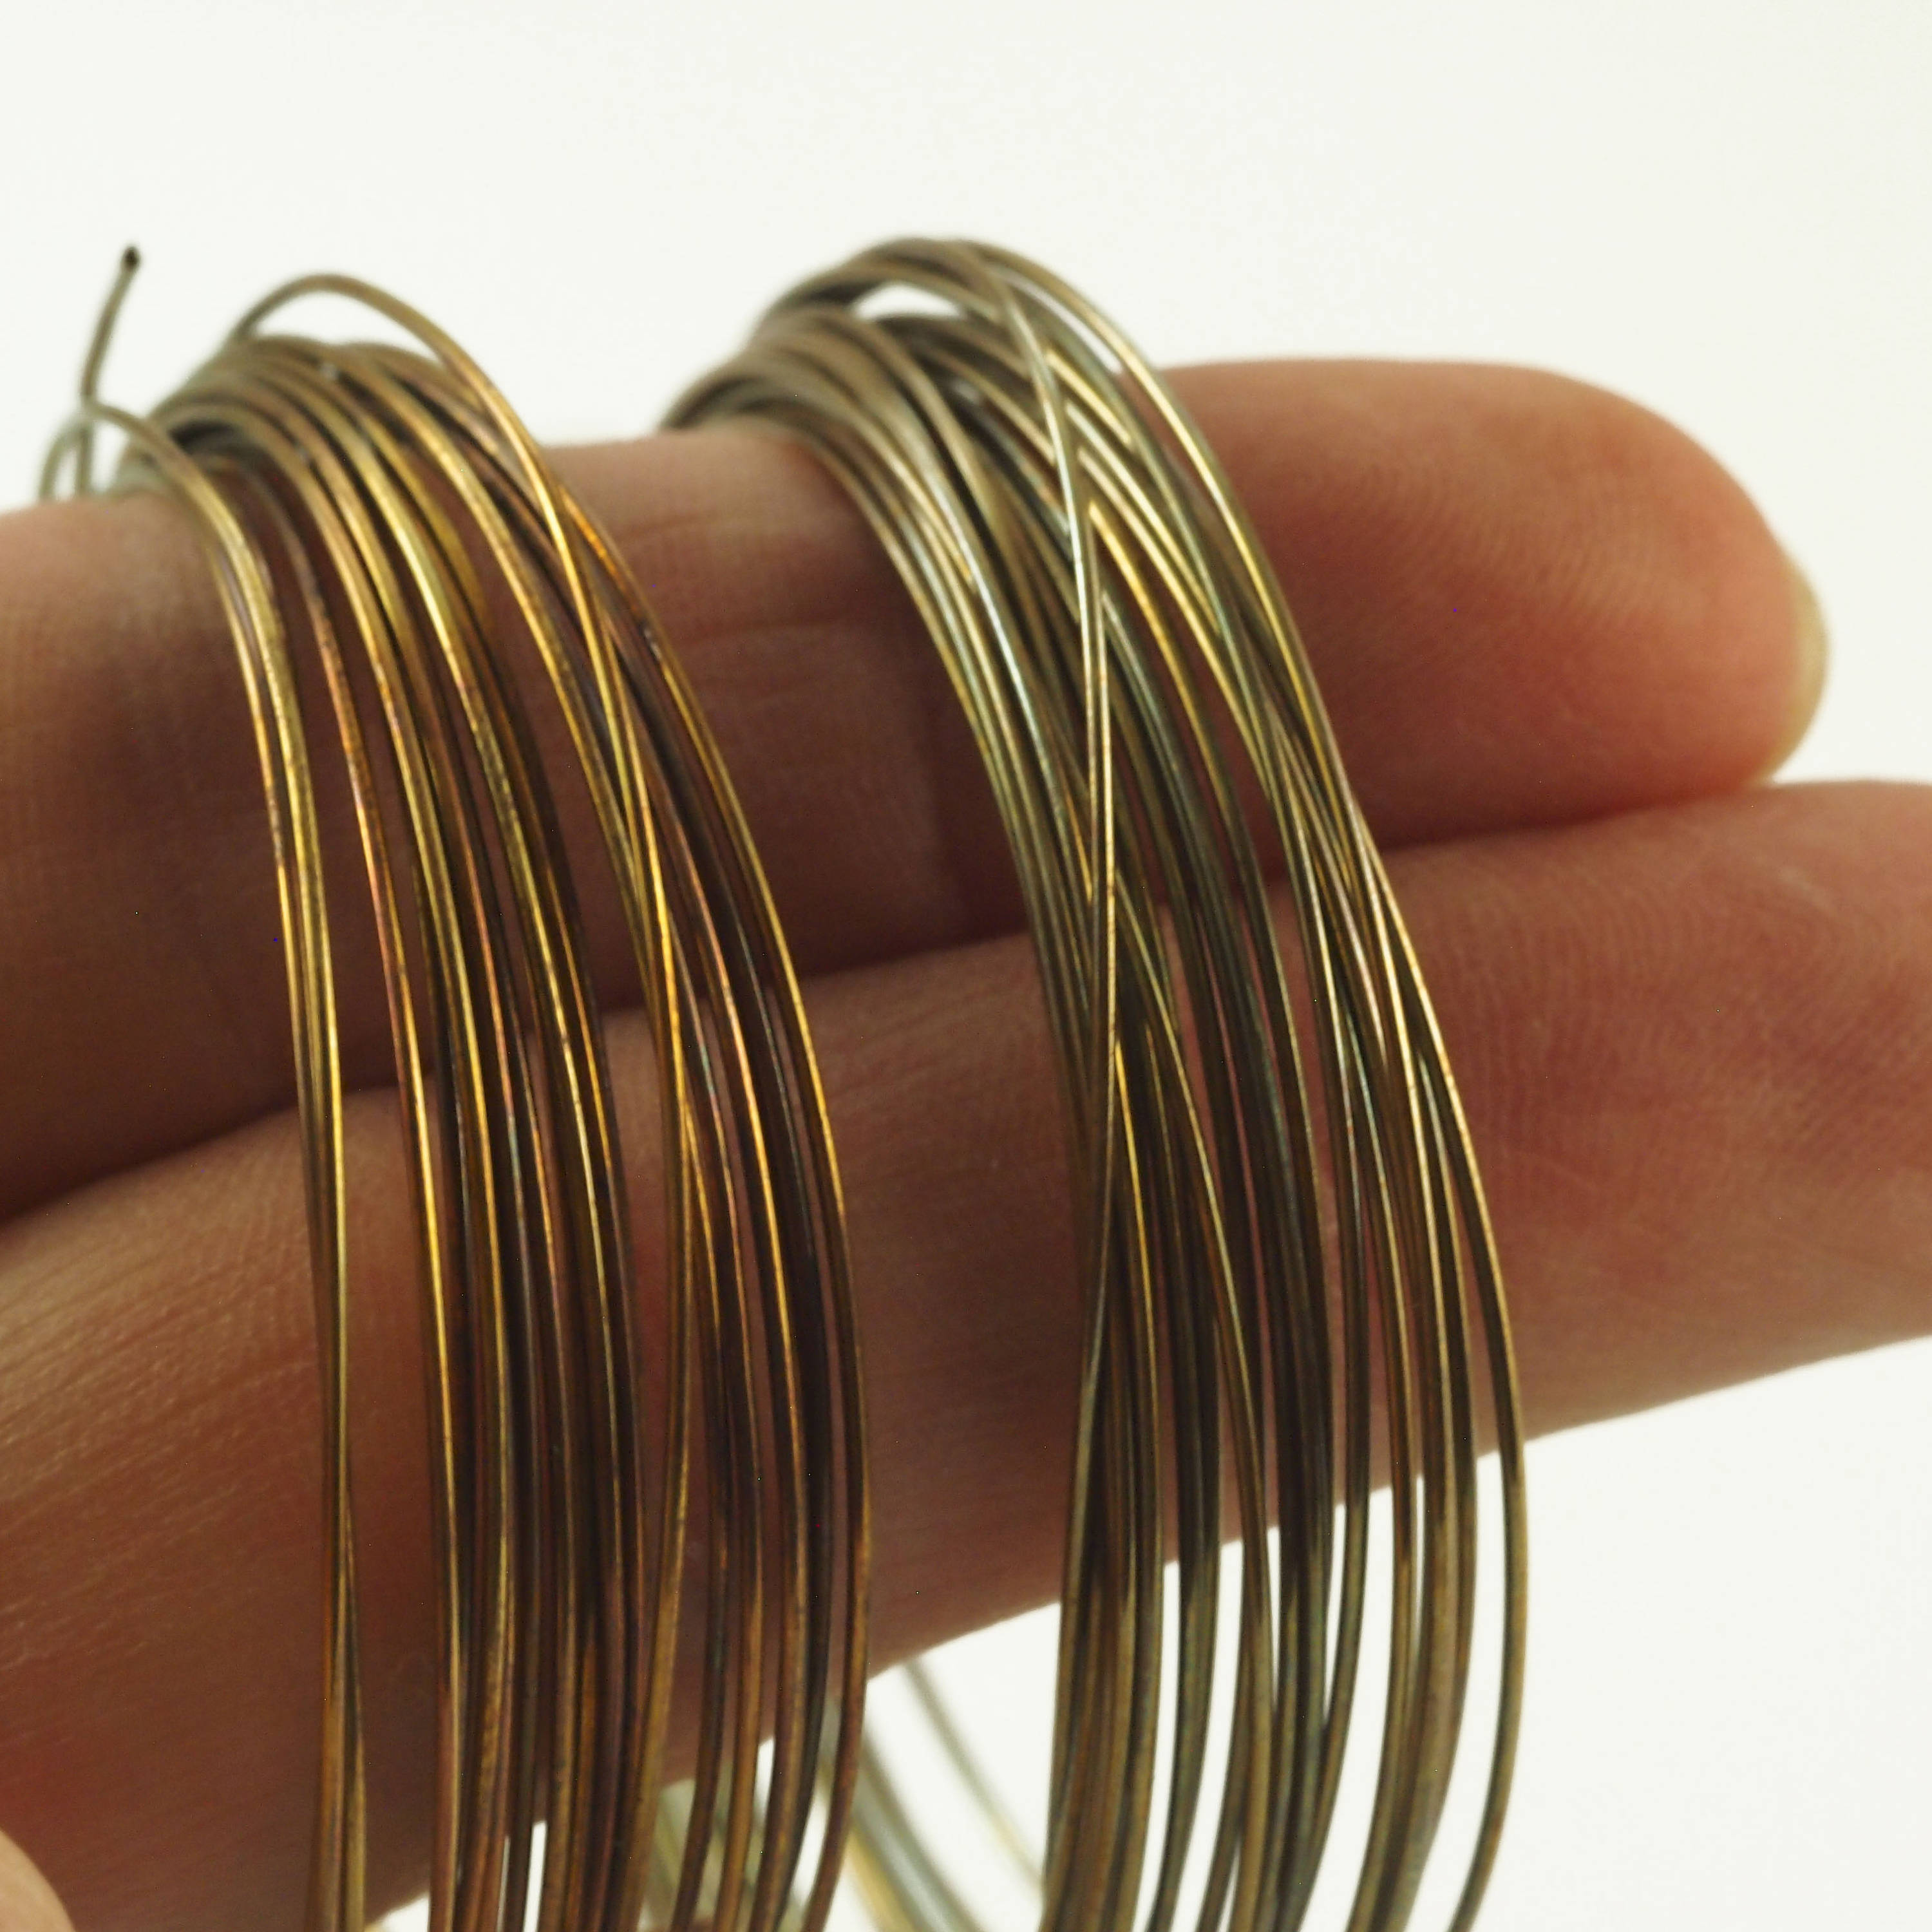 Oxidized Brass Wire - Hand Finished - You Pick Gauge 12, 14, 16